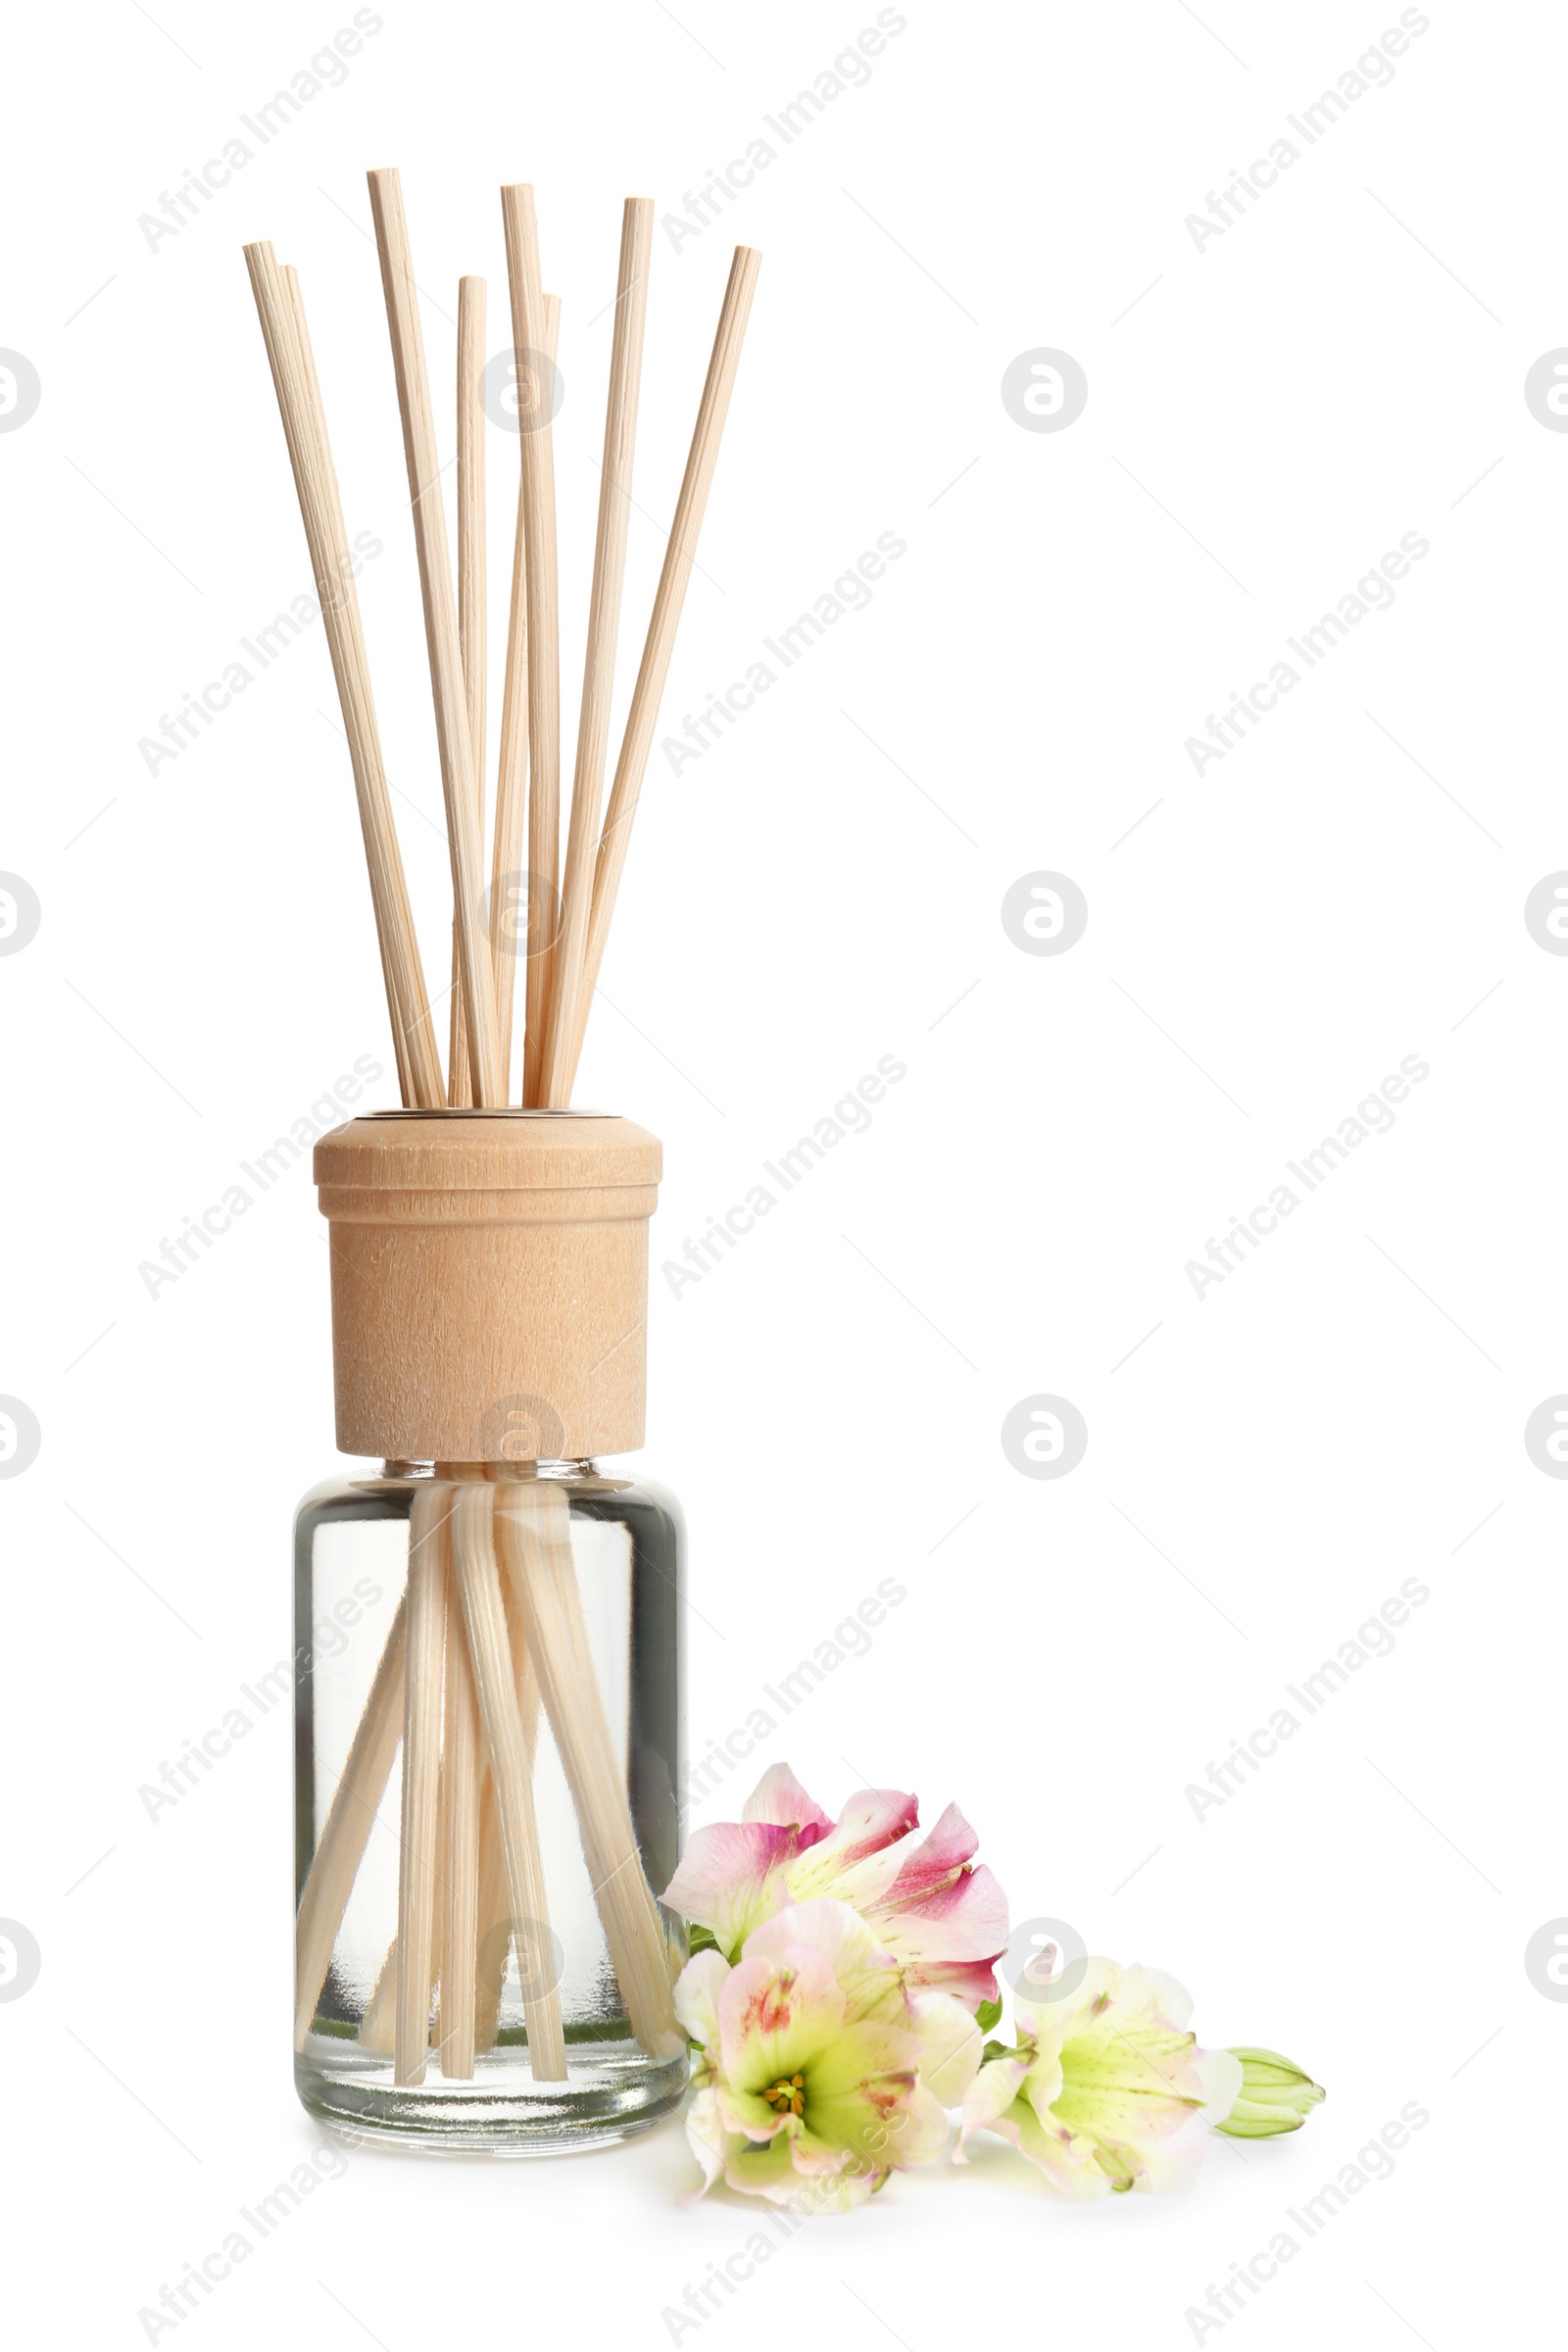 Photo of New reed air freshener and flowers on white background